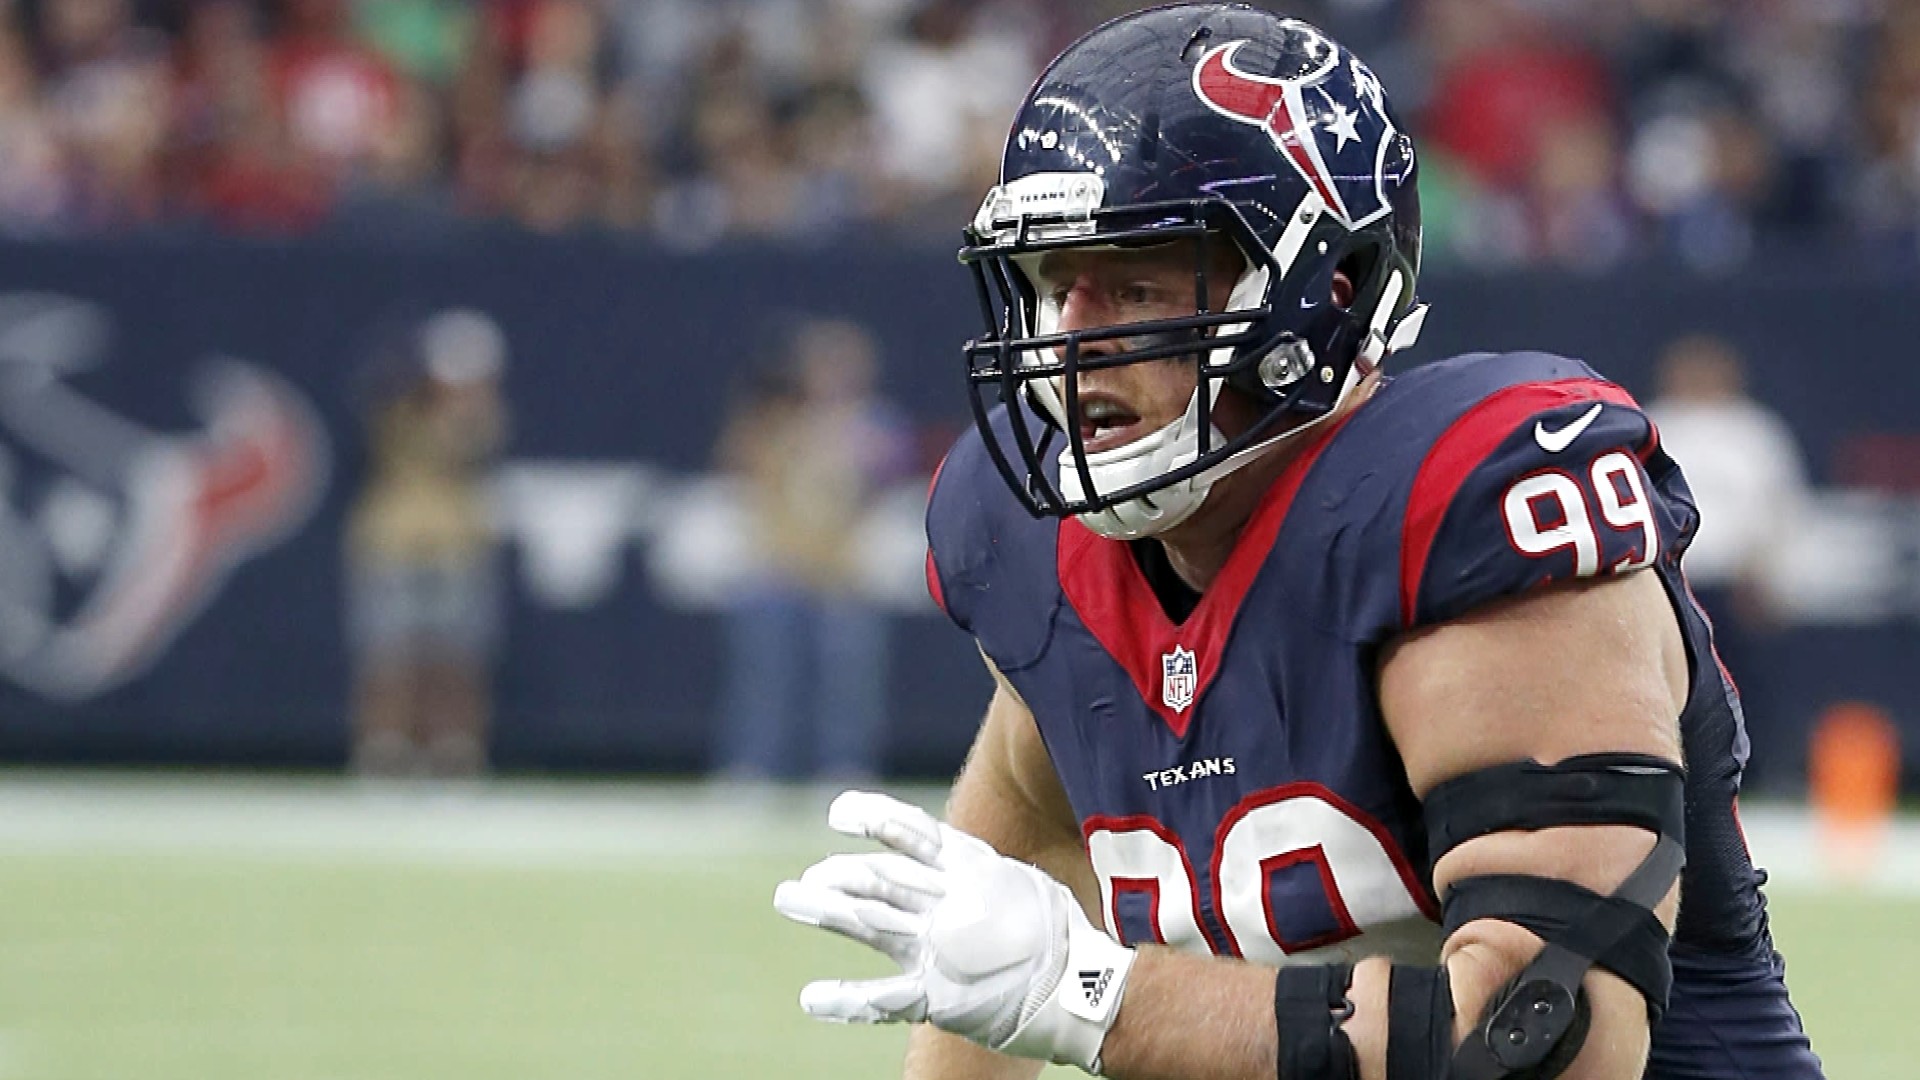 1920x1080 J.J. Watt describes 'down times' after missing time with Houston Texans |  NBC Sports